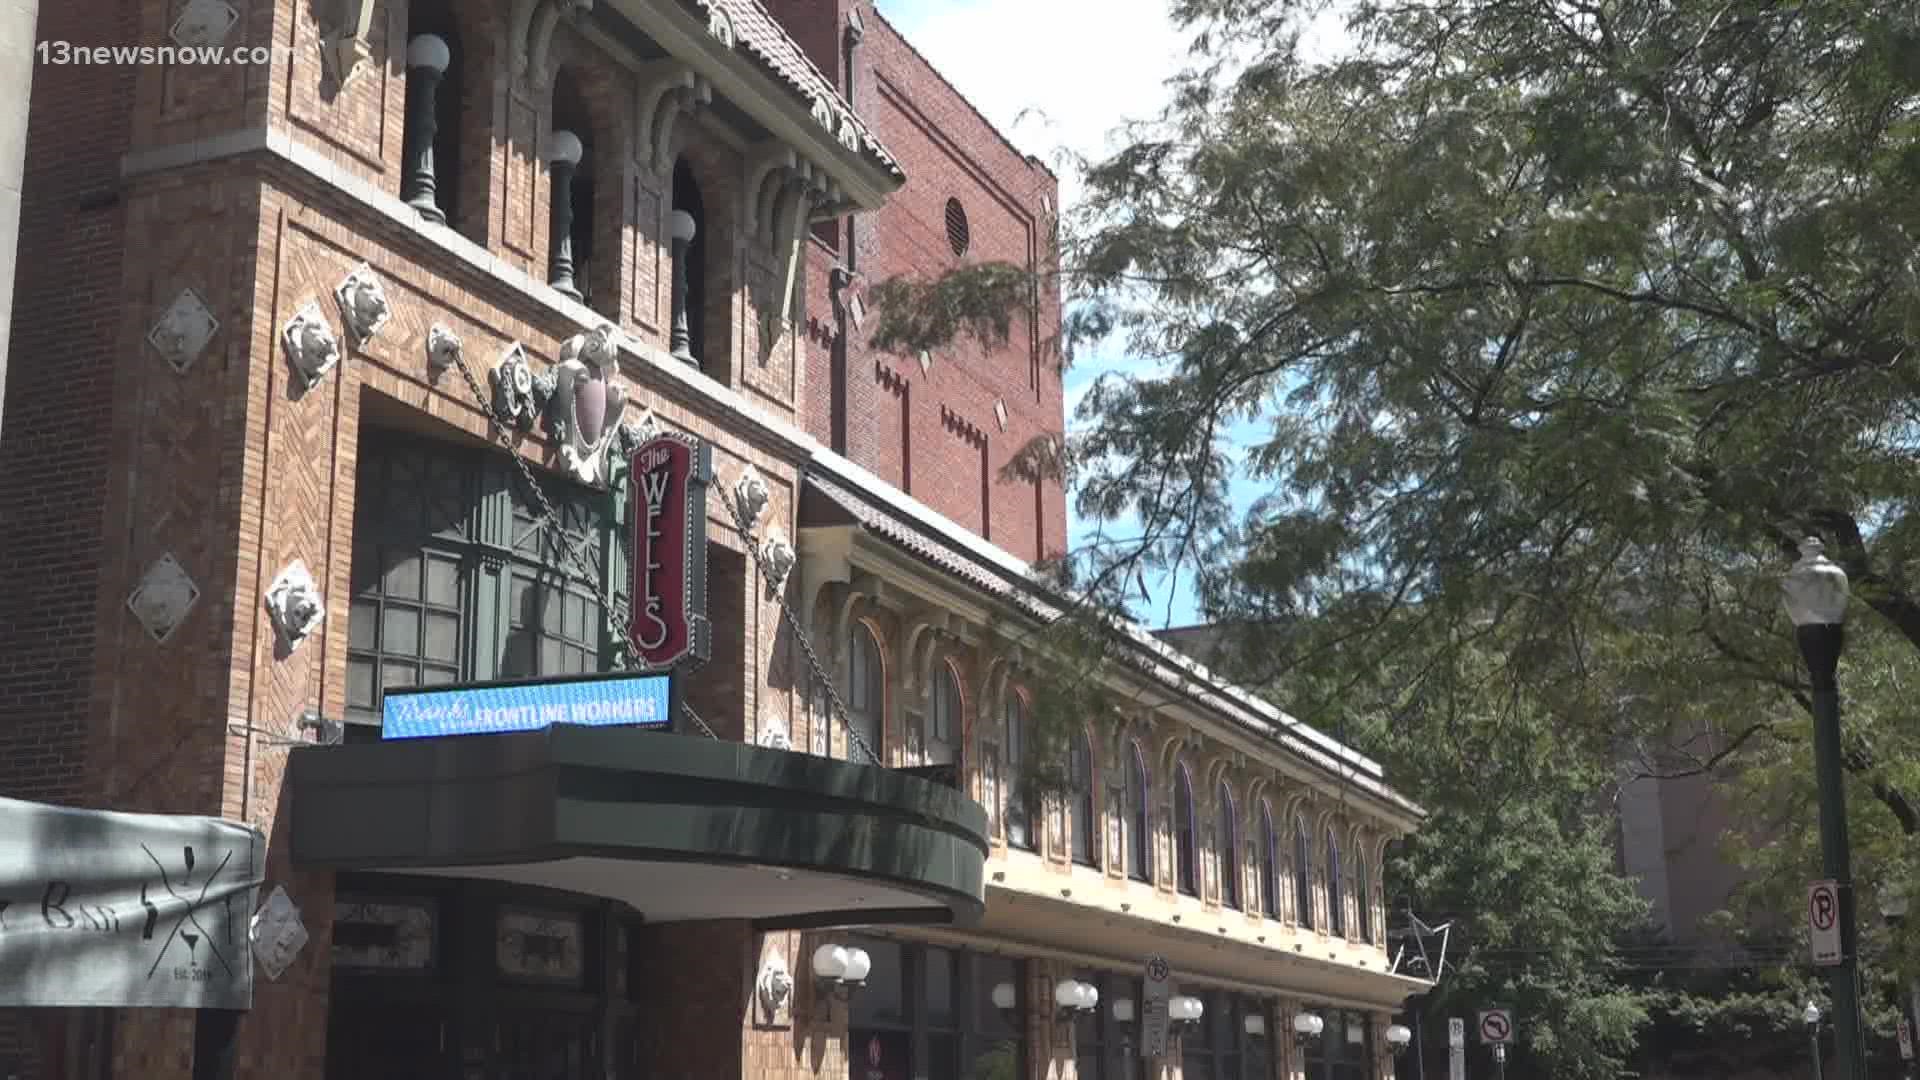 The Wells Theatre has more than a century of history in Downtown Norfolk. Workers believe some people loved this place so much, they never left.